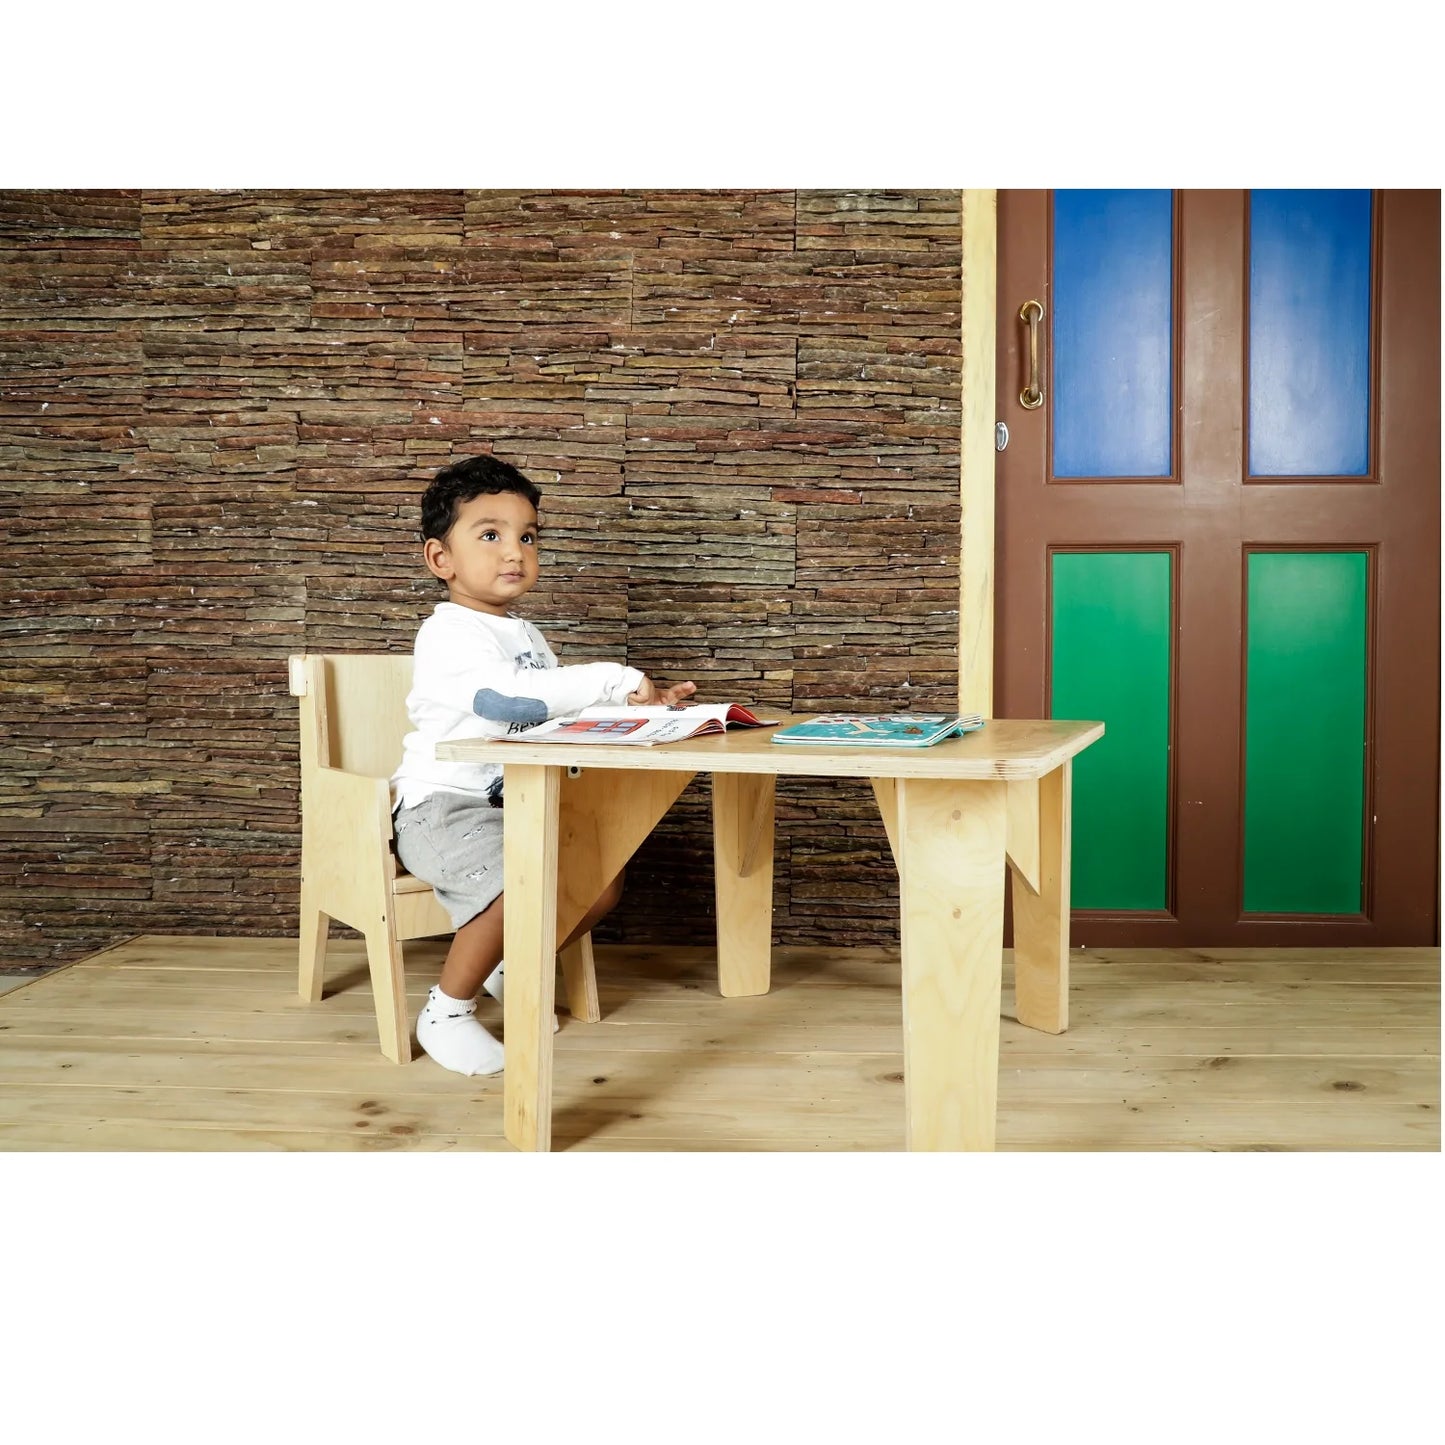 Buy Littles' Planet Montessori Wooden Table - Child Play Table -  SkilloToys.com